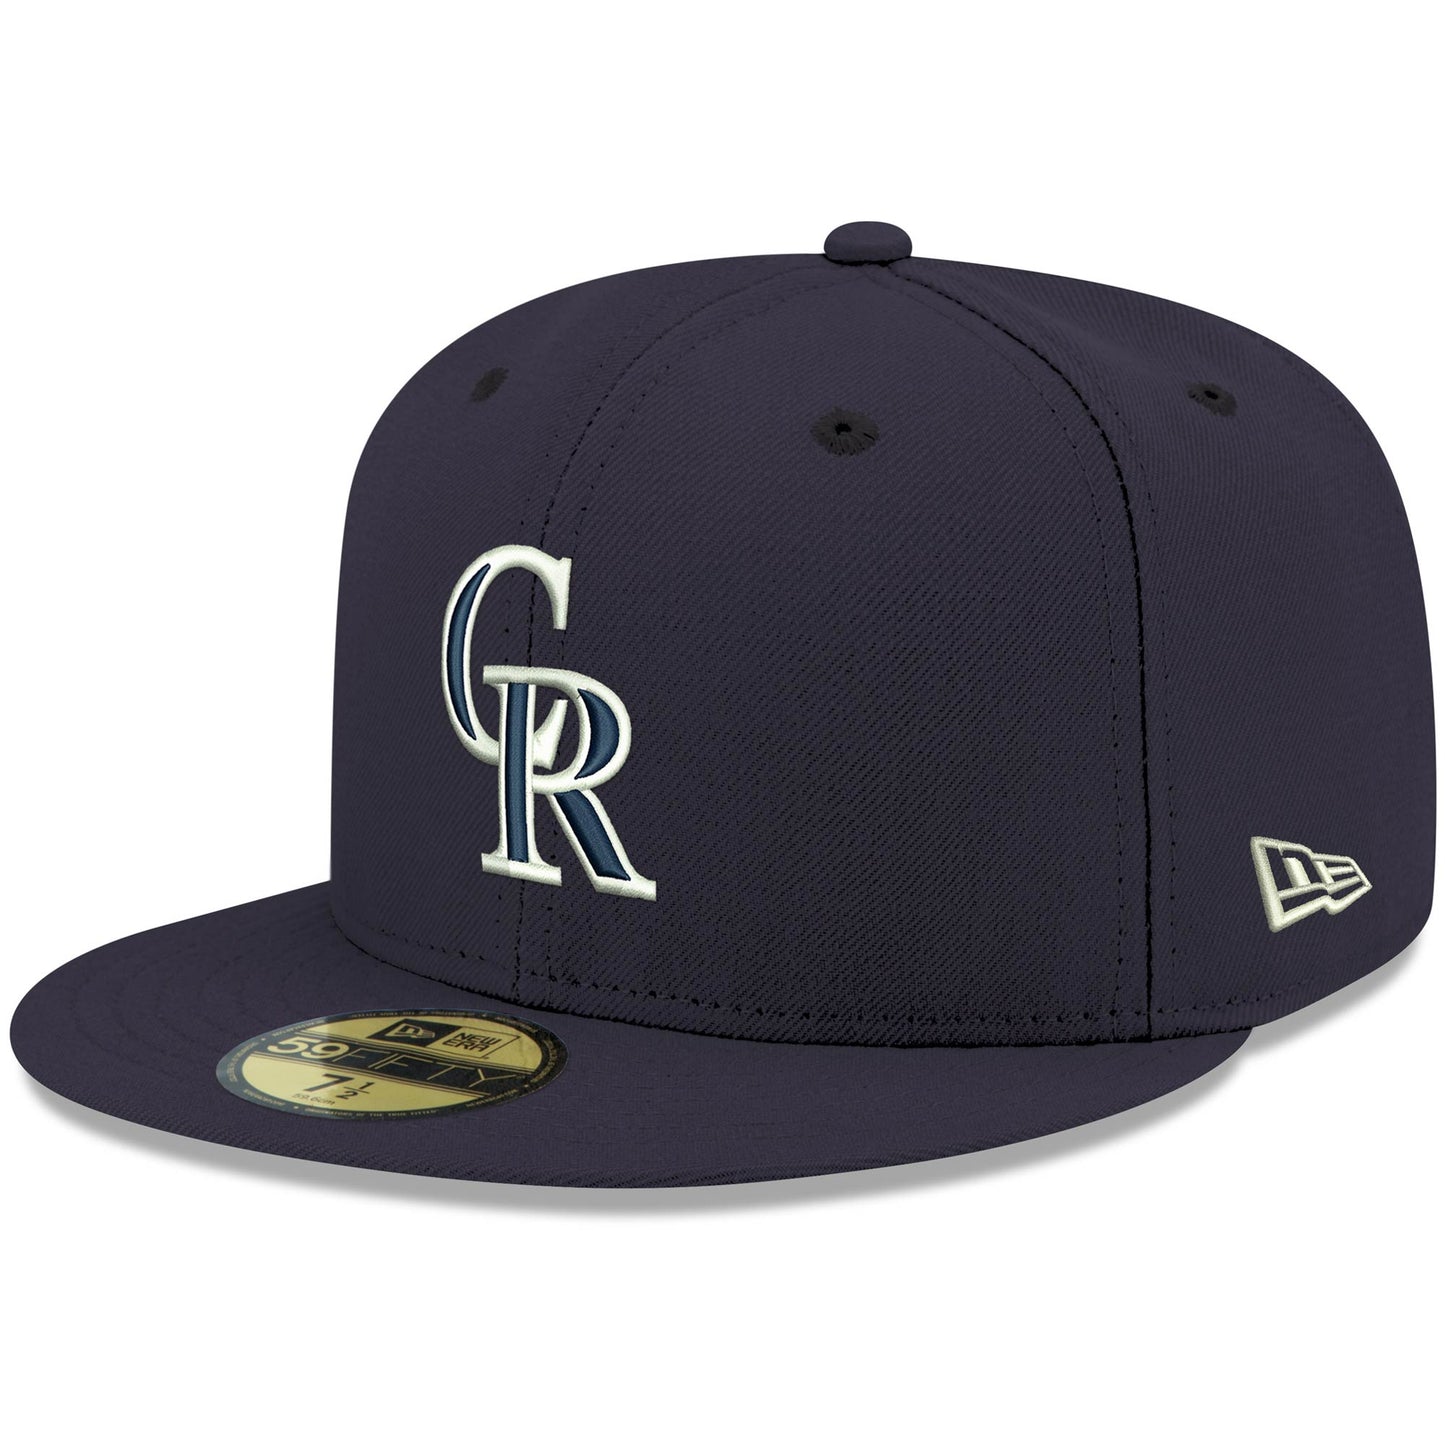 Colorado Rockies New Era White Logo 59FIFTY Fitted Hat - Navy